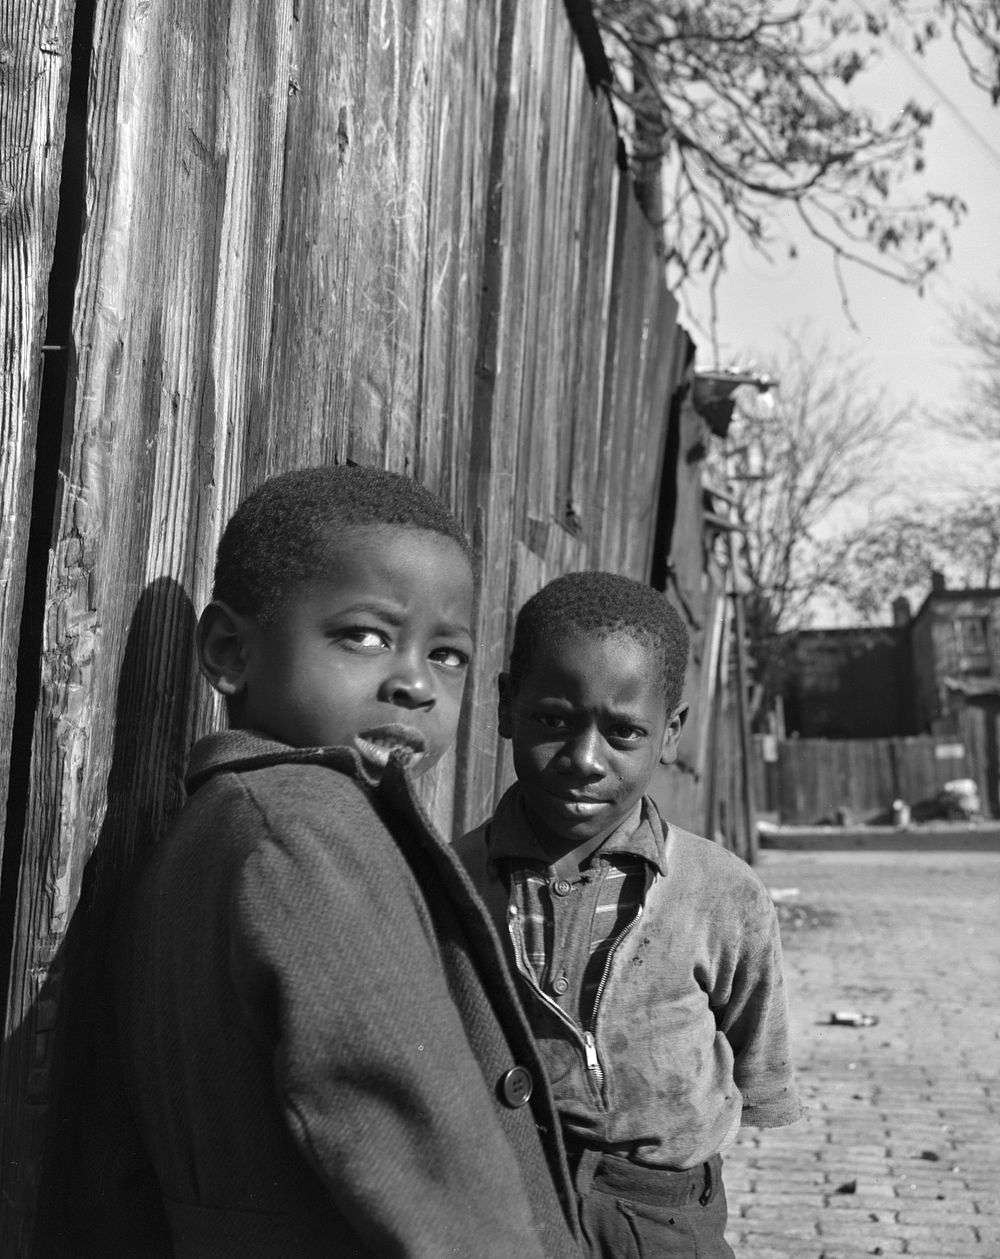 Washington (southwest section), D.C. Two  boys. Sourced from the Library of Congress.